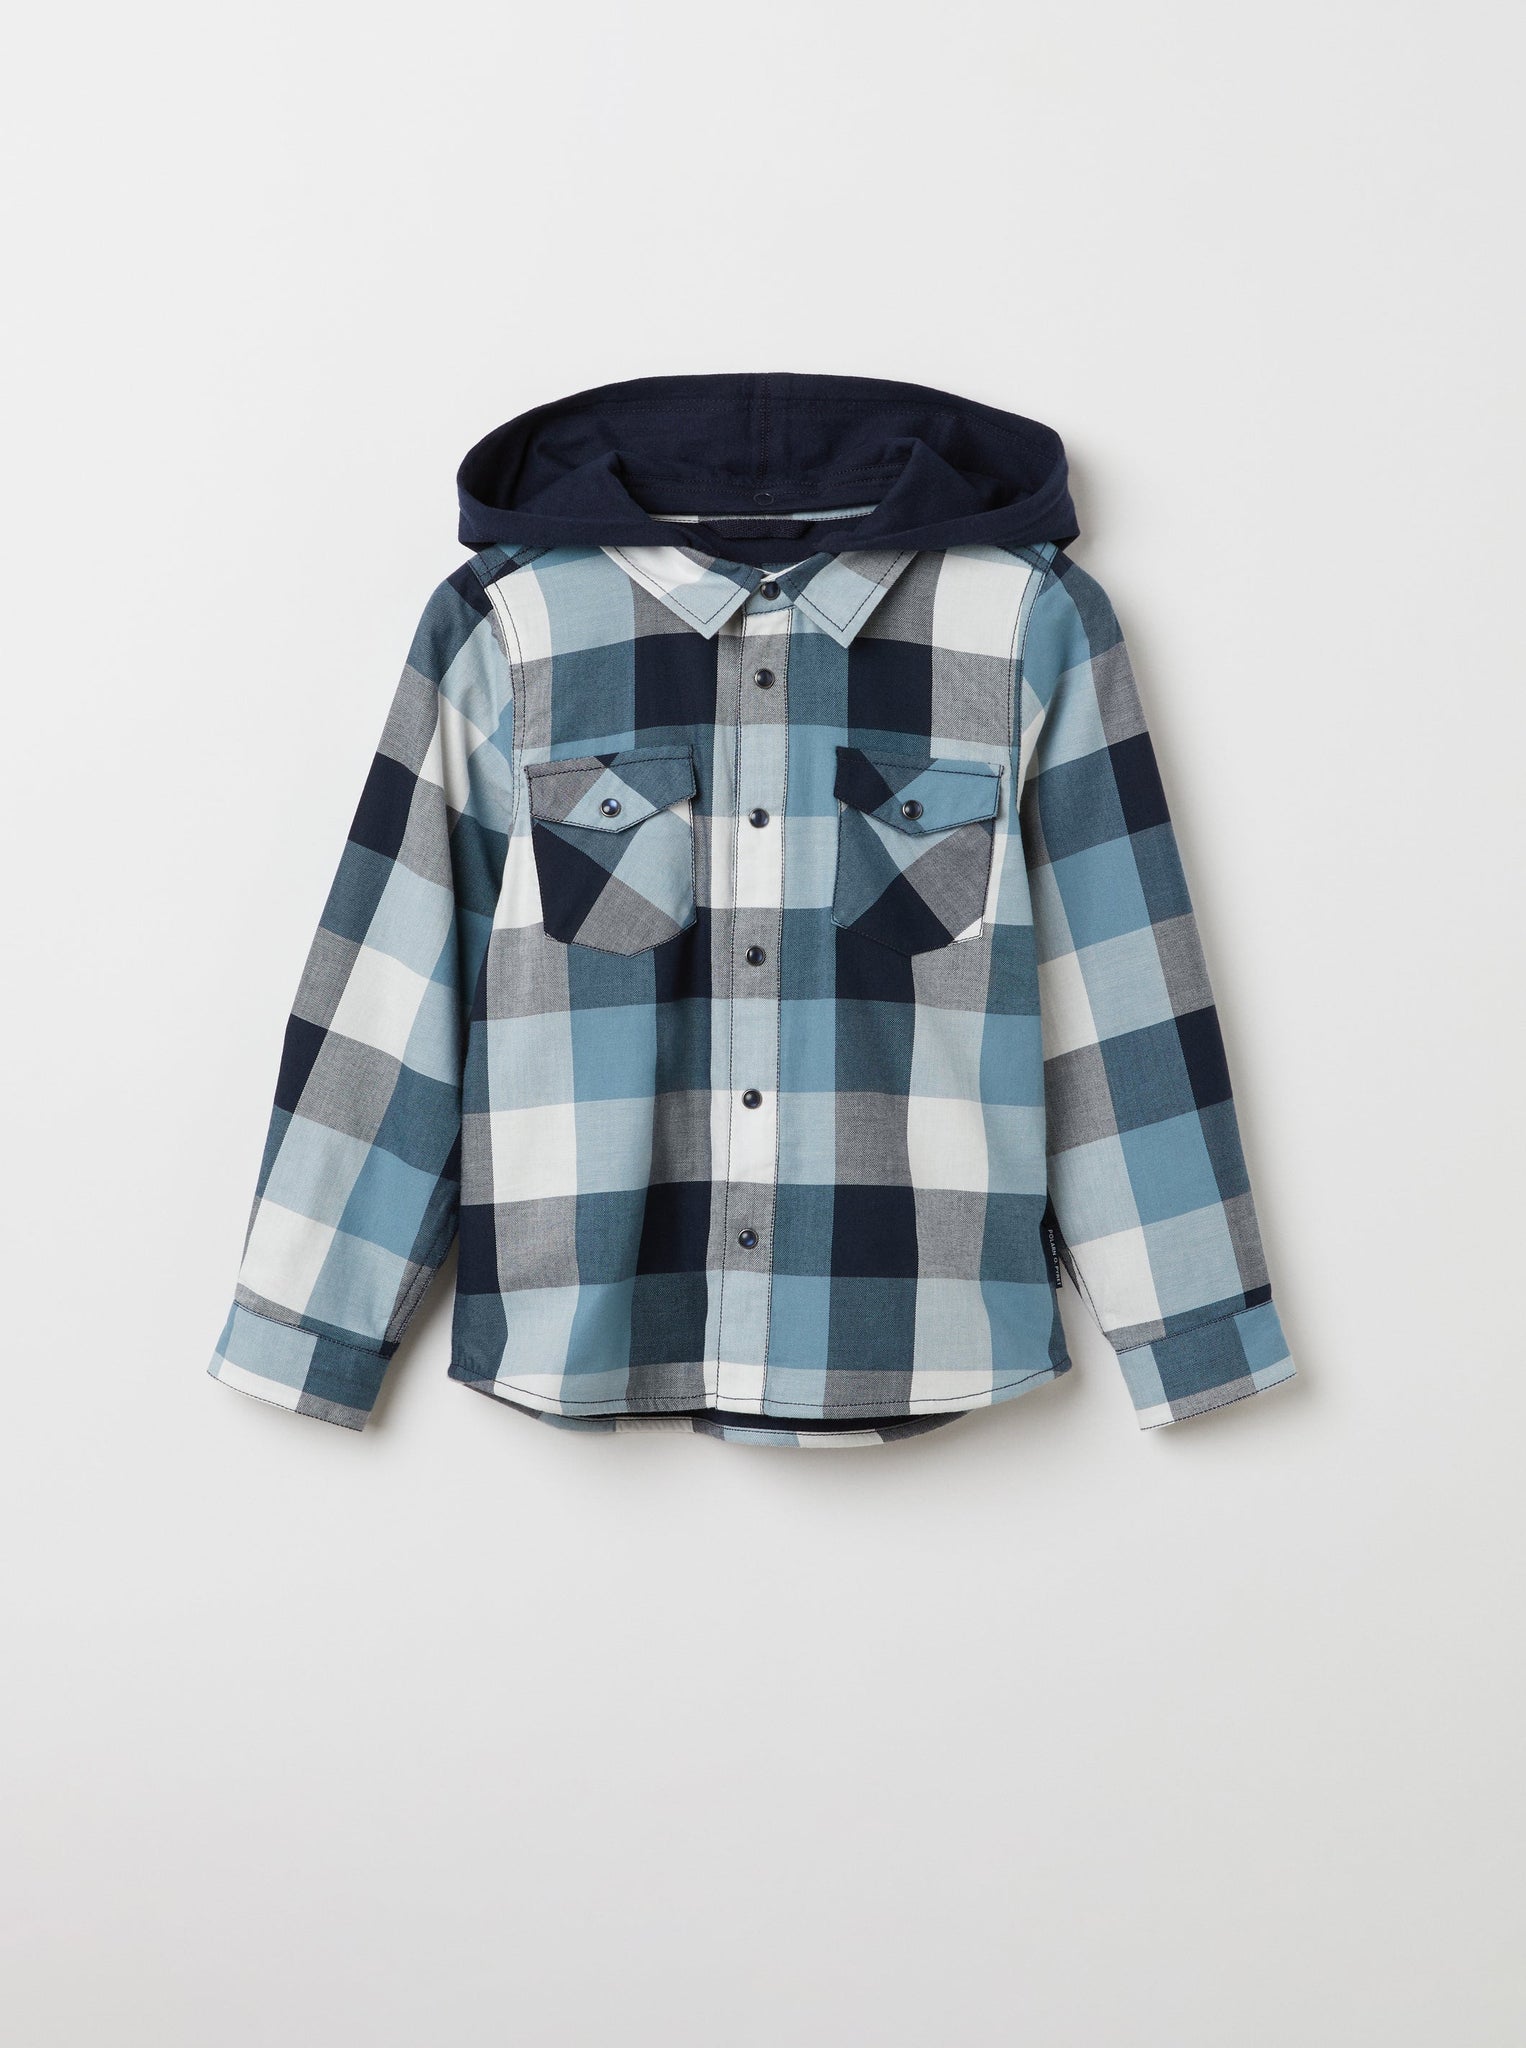 Hooded Blue Kids Checked Shirt from the Polarn O. Pyret kidswear collection. The best ethical kids clothes